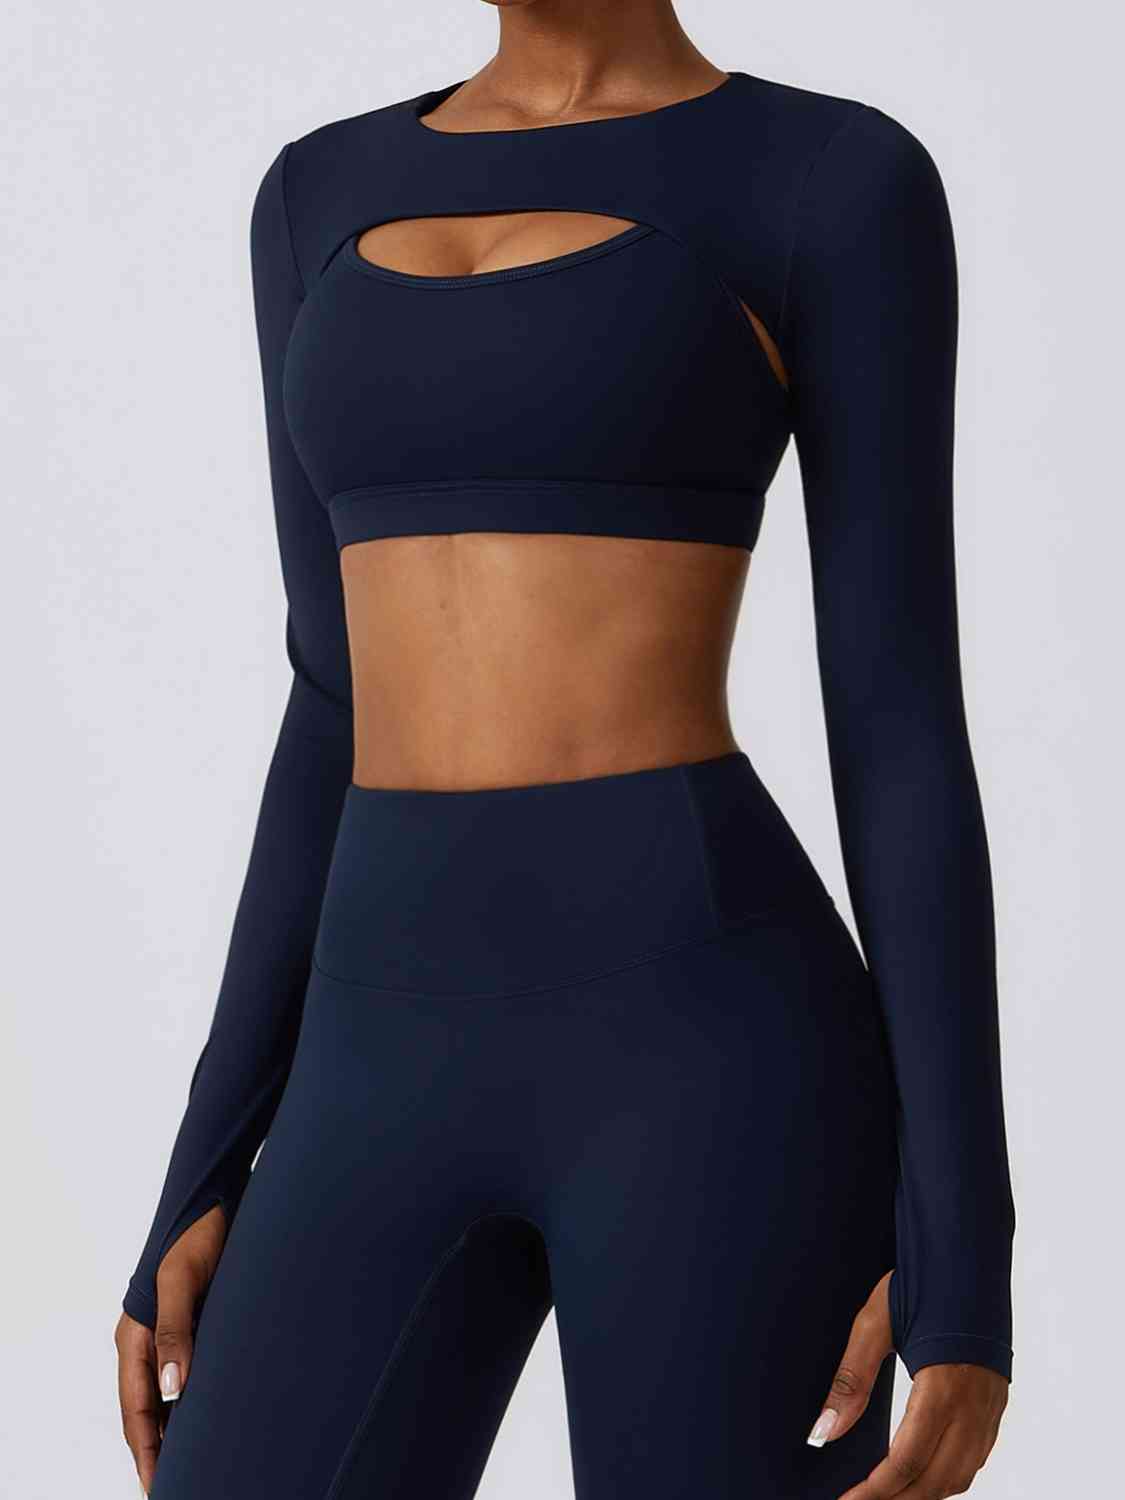 Black Cropped Cutout Long Sleeve Sports Top Sentient Beauty Fashions Apparel & Accessories